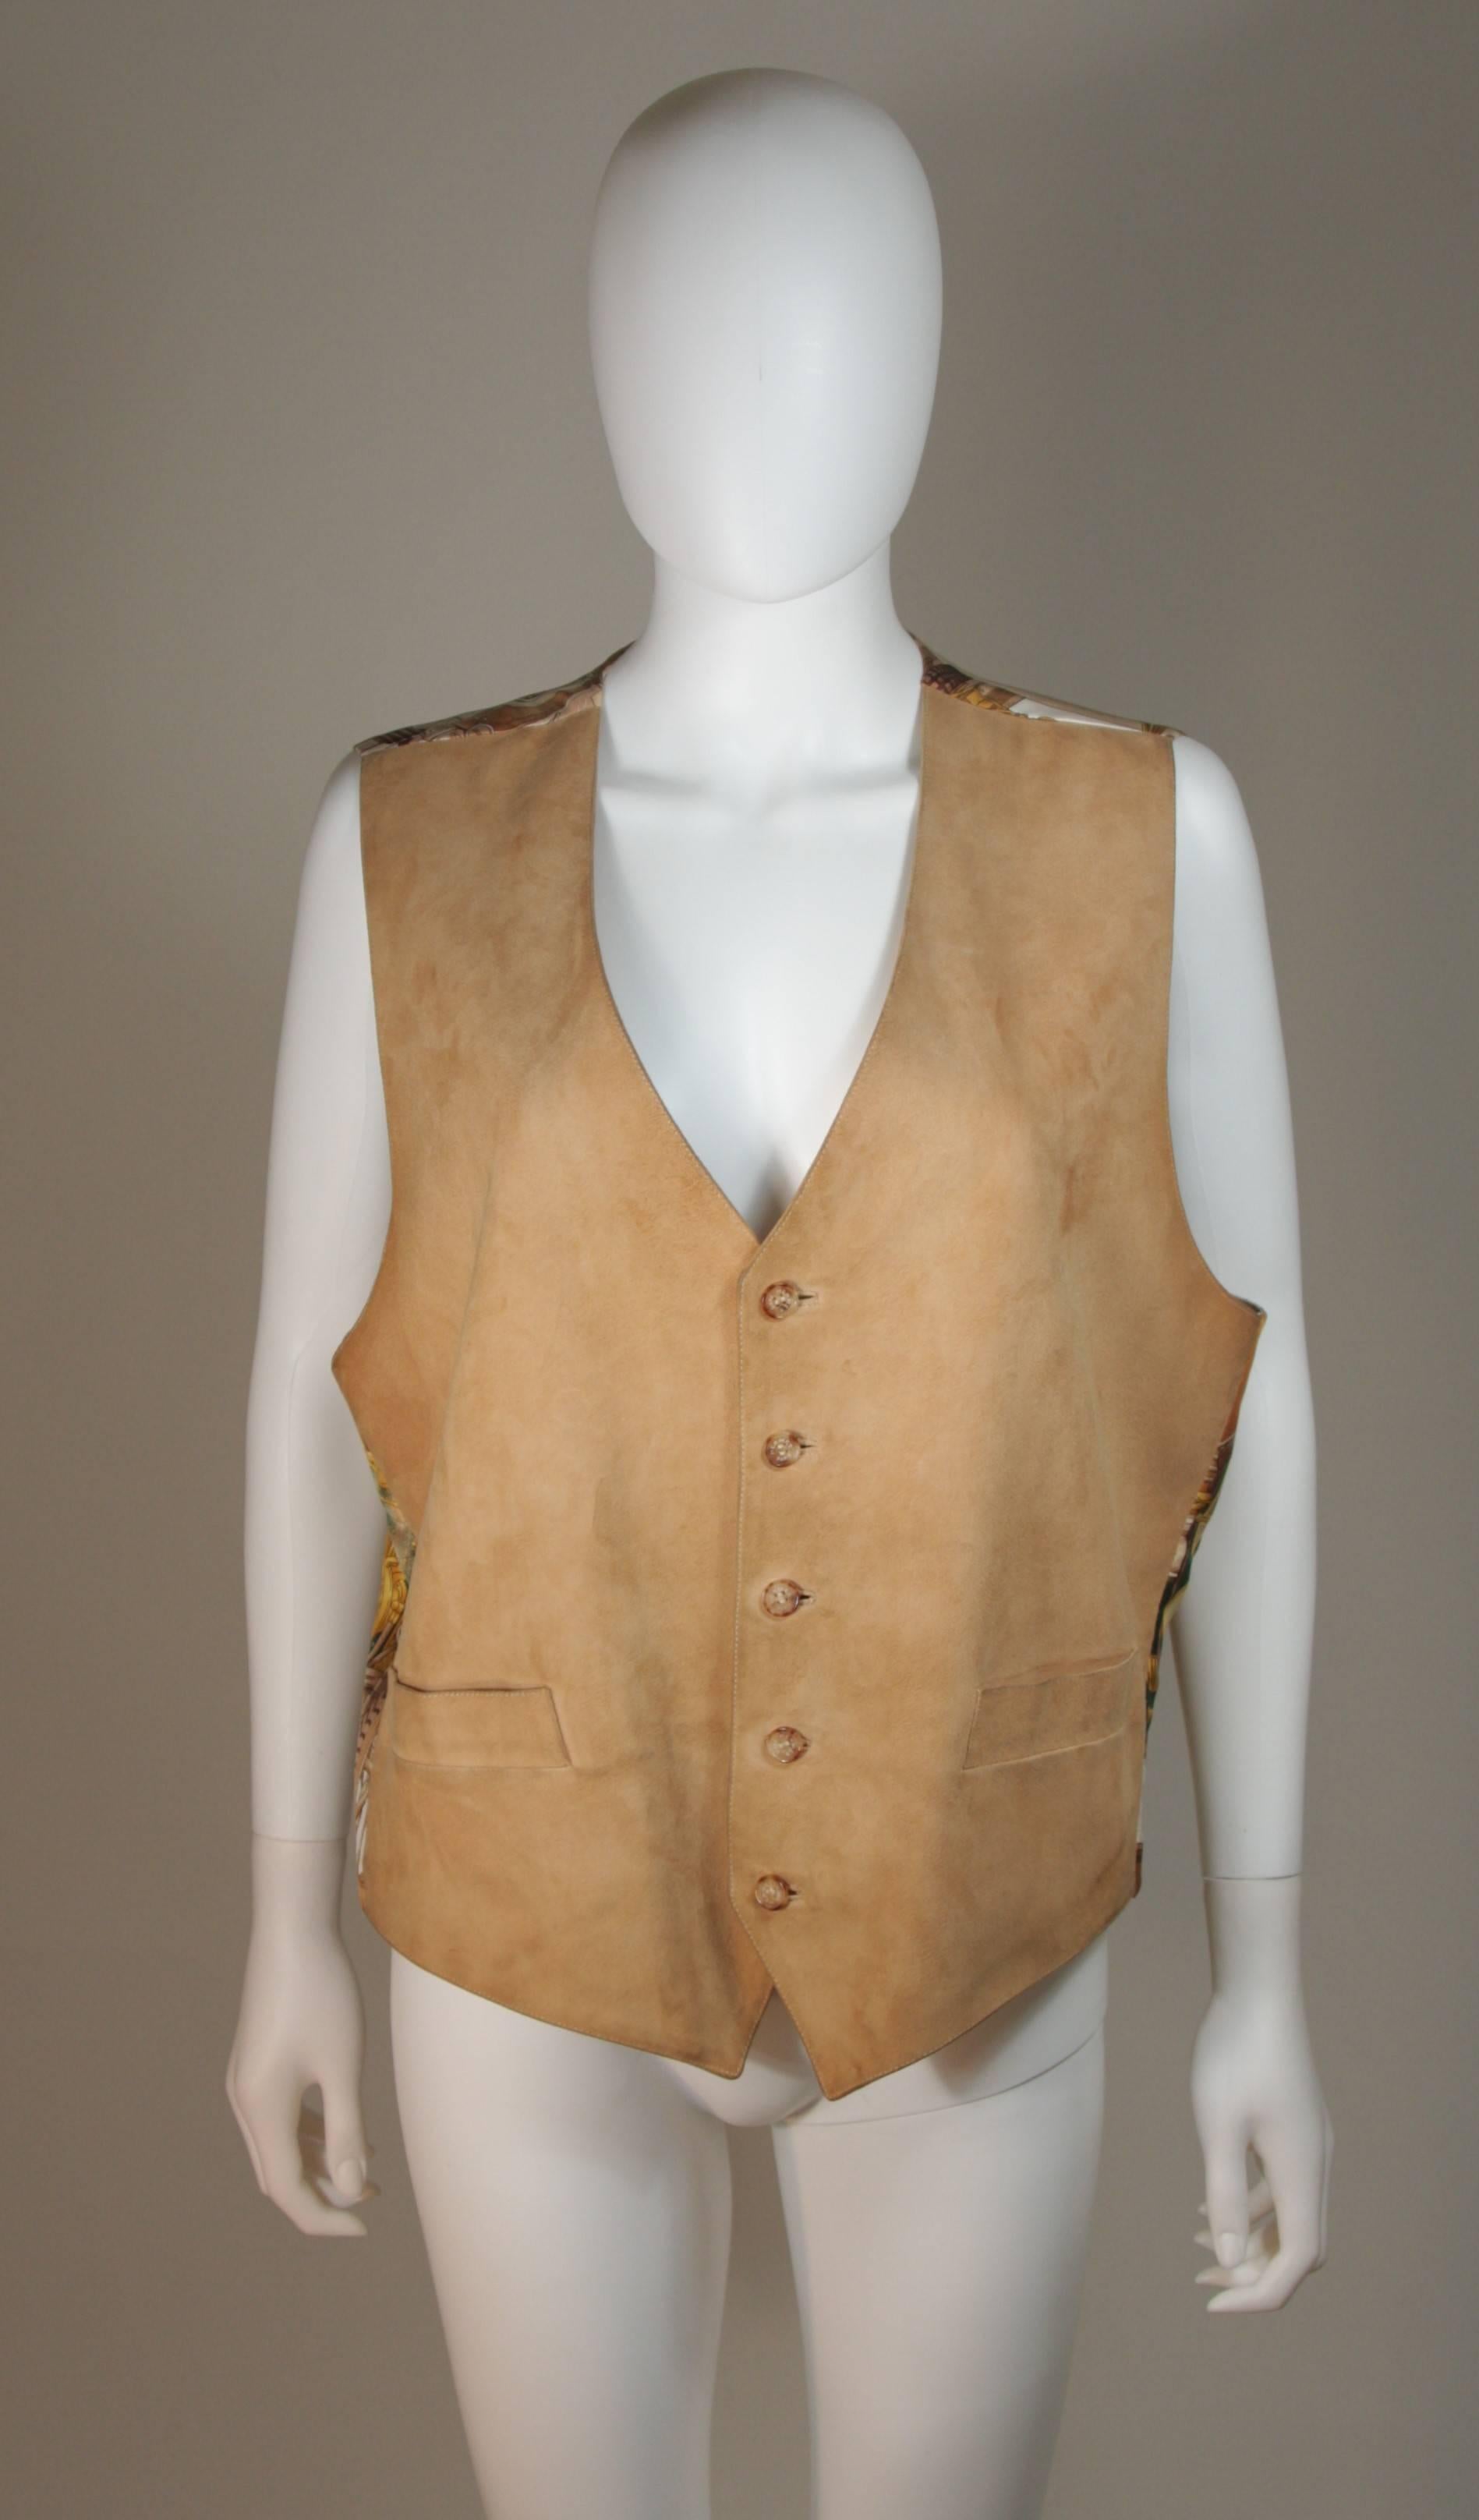  This Hermes design is available for viewing at our Beverly Hills Boutique. We offer a large selection of evening gowns and luxury garments. 

 This vest is composed a natural color suede front and a printed silk back. There are front pockets and